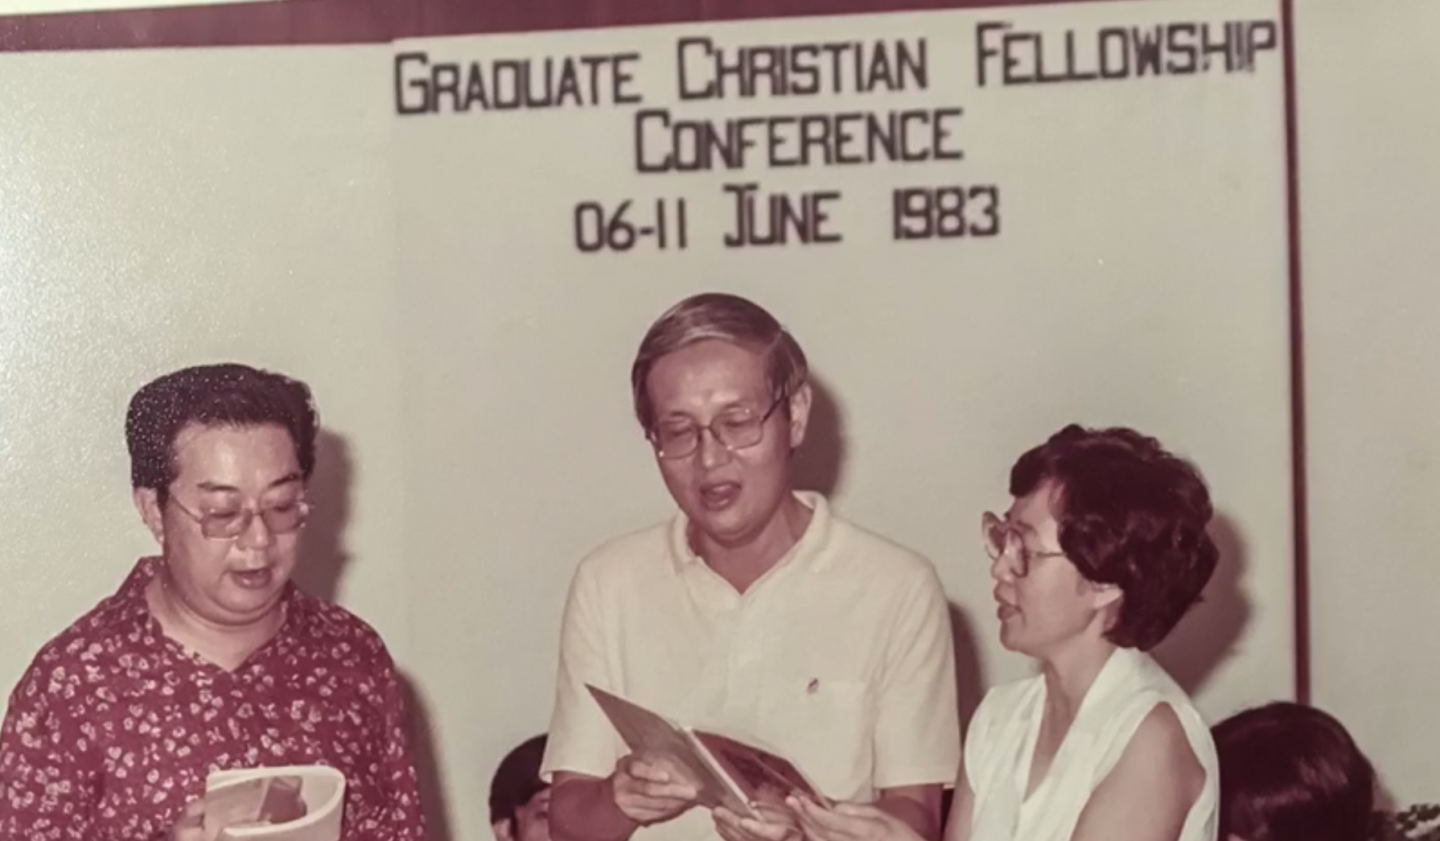 Dr Sng was the General Secretary of the Fellowship of Evangelical Students (FES) and, later, Graduate Secretary of the Graduate Christian Fellowship (GCF).